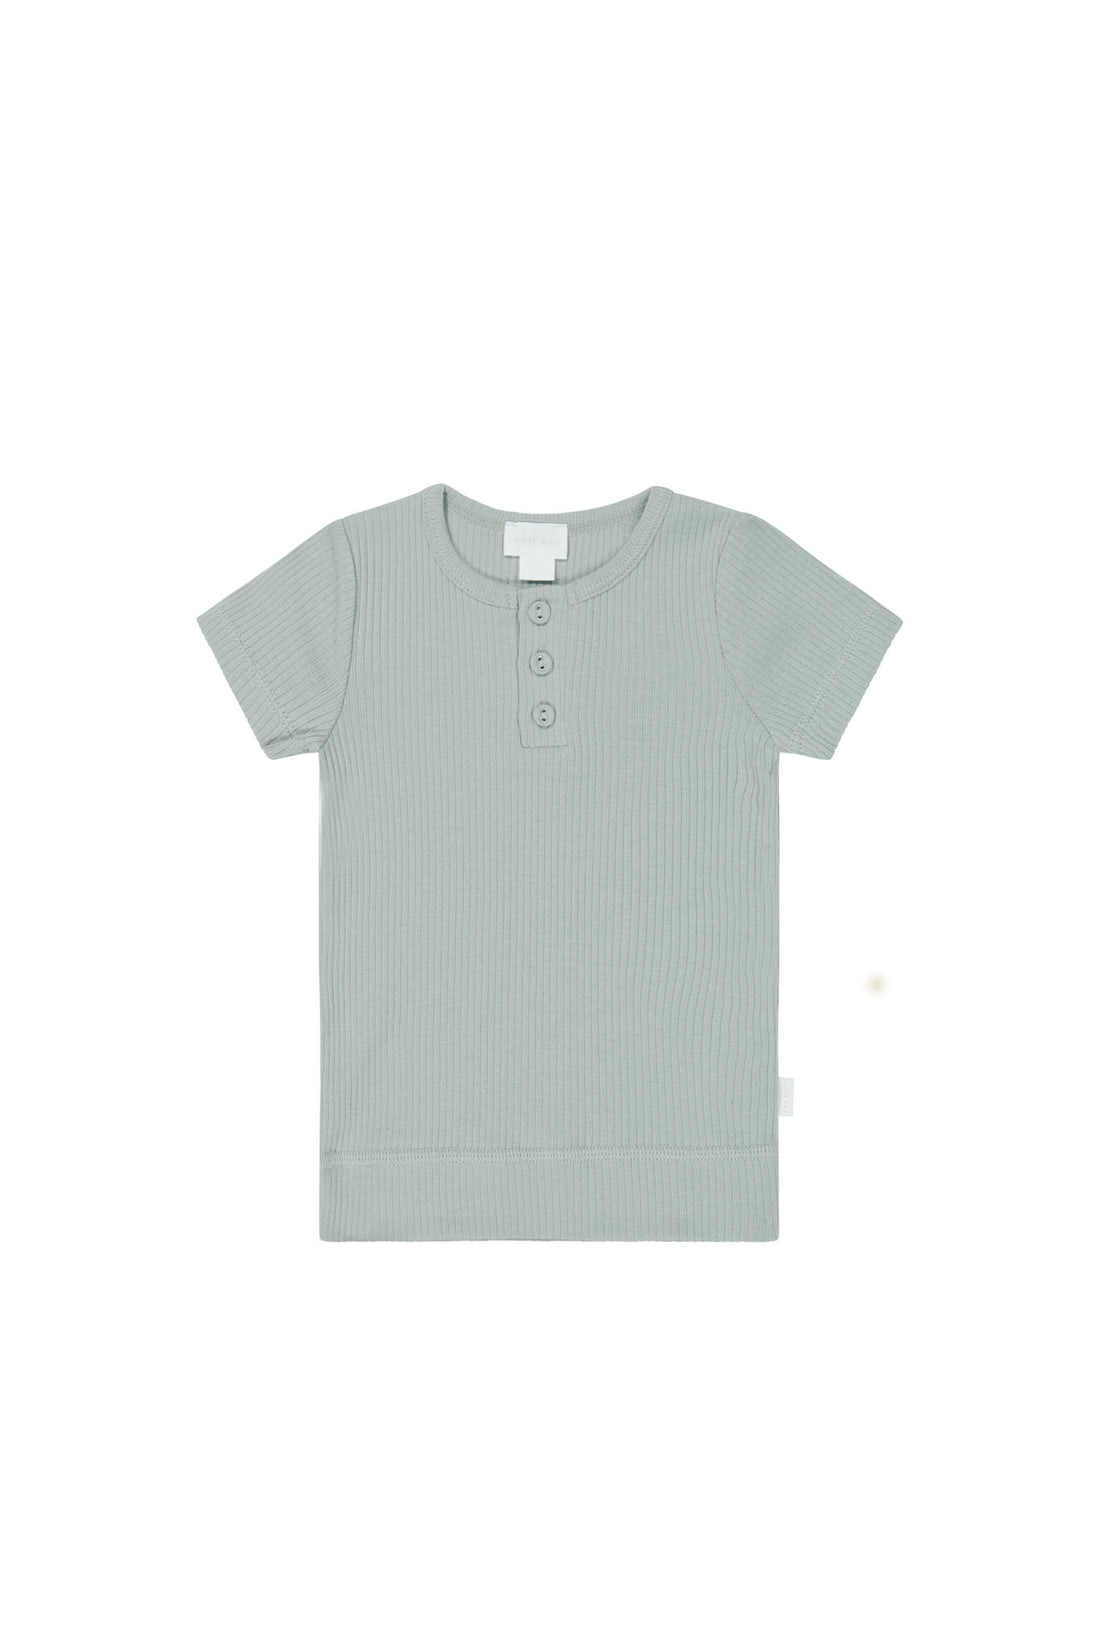 Organic Cotton Modal Henley Tee - Mineral Childrens Top from Jamie Kay NZ